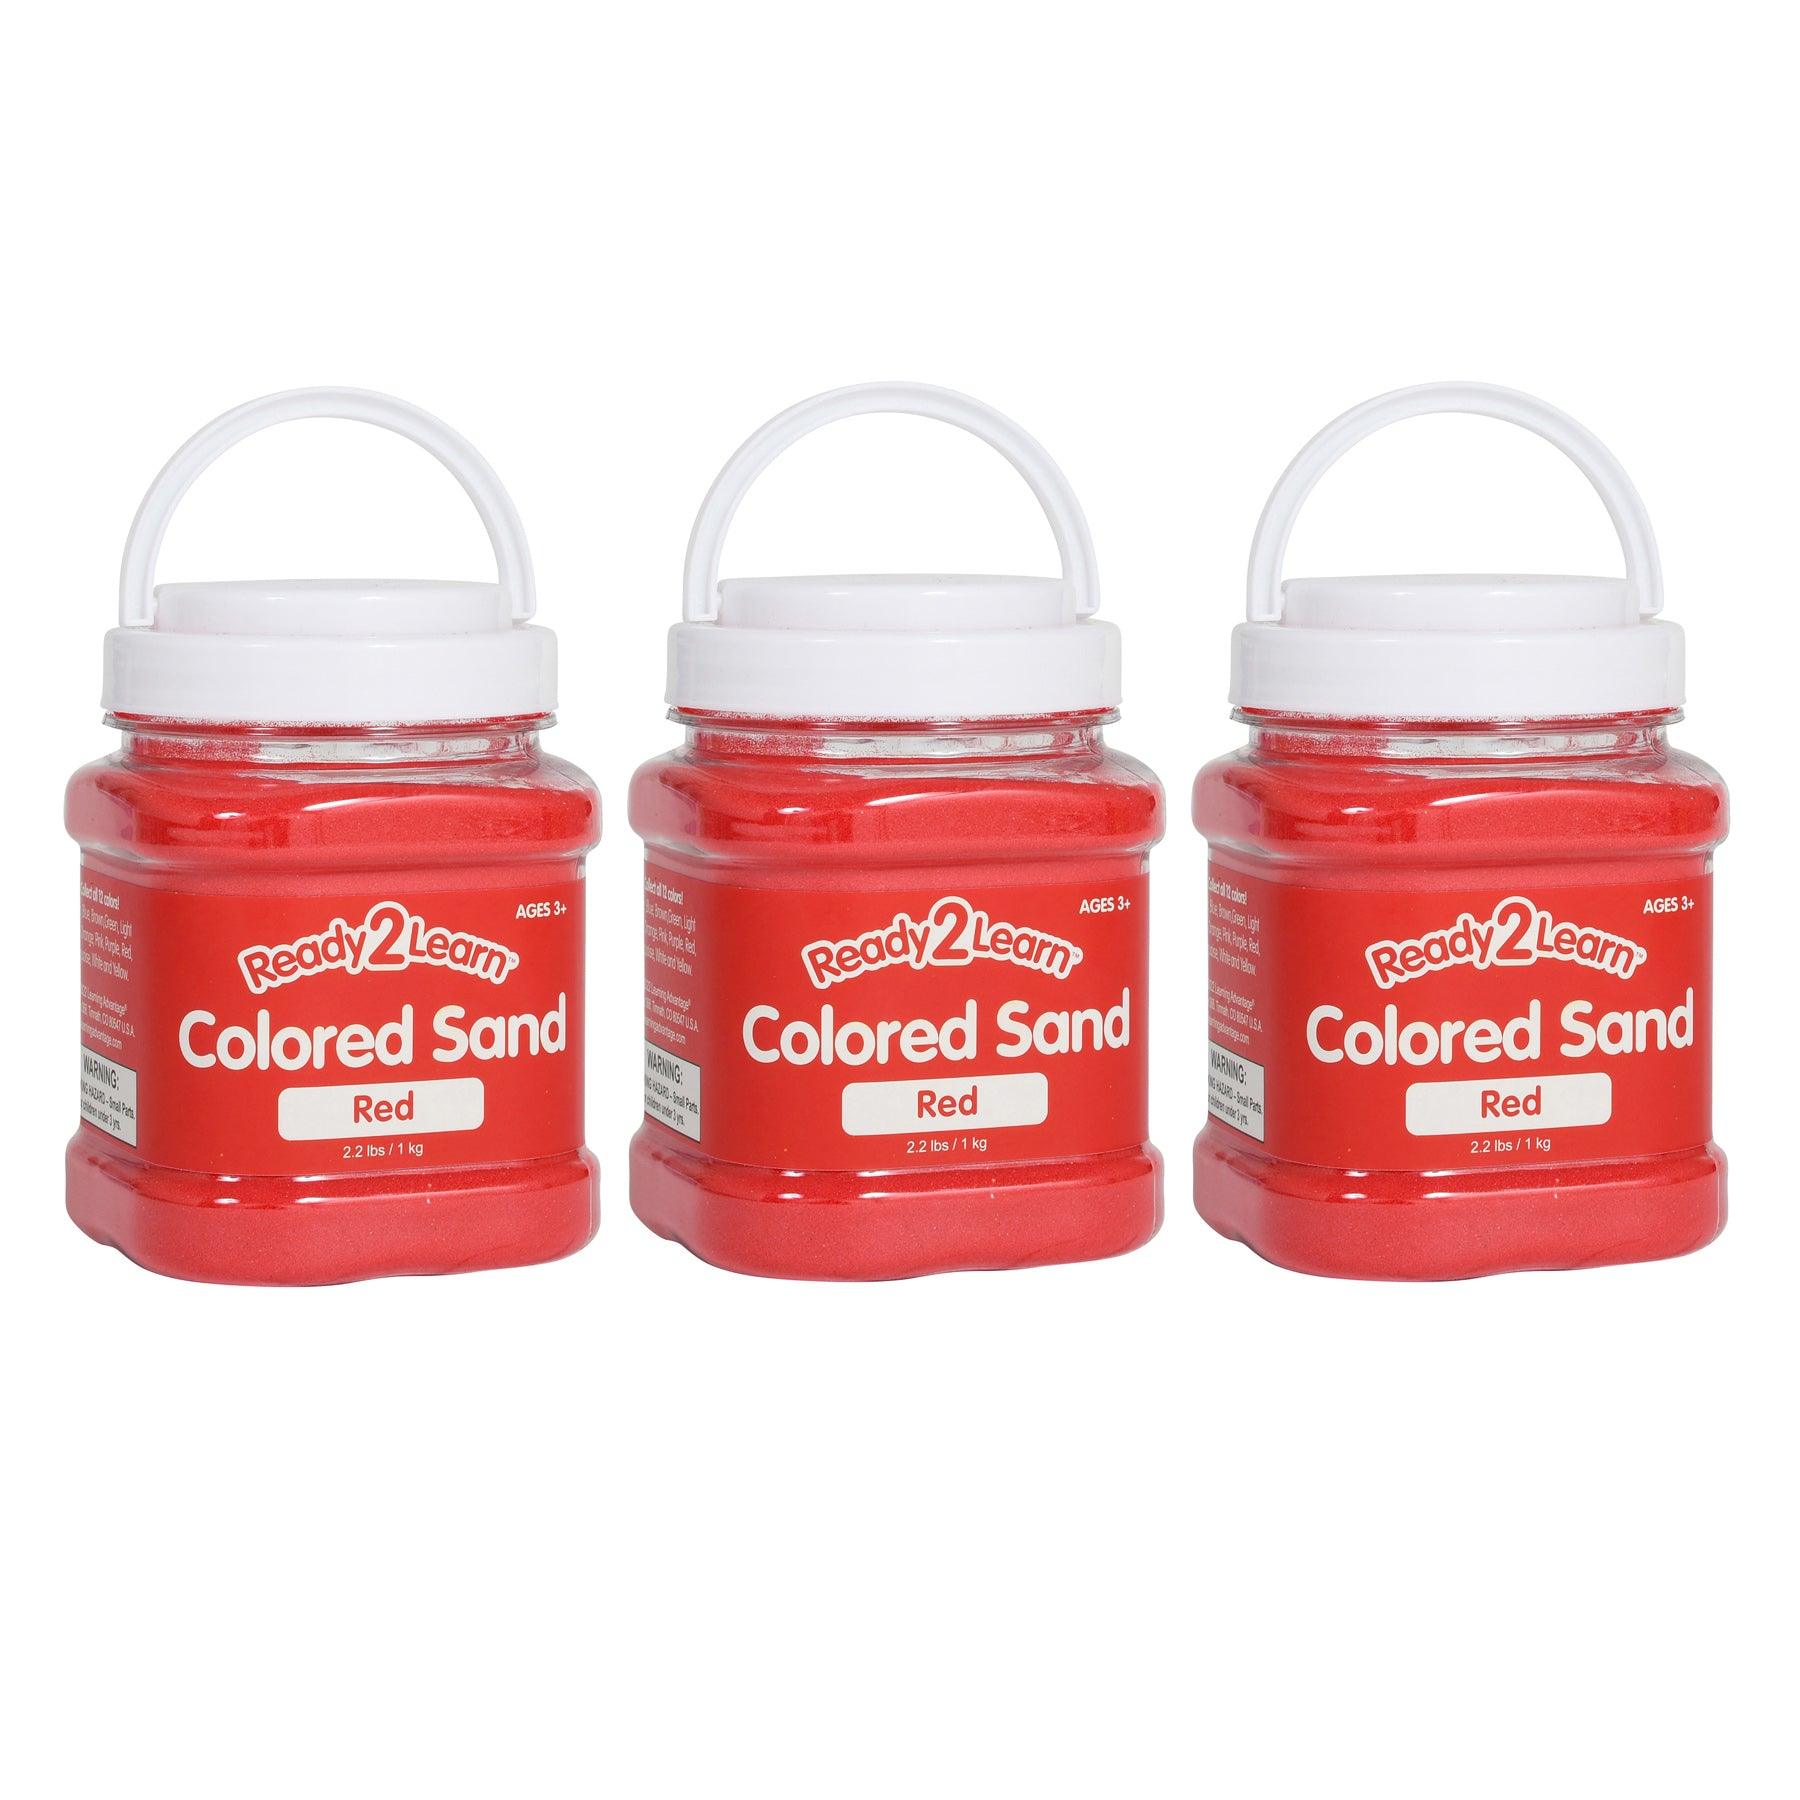 Colored Sand - Red - 2.2 lb. Jar - Pack of 3 - Loomini